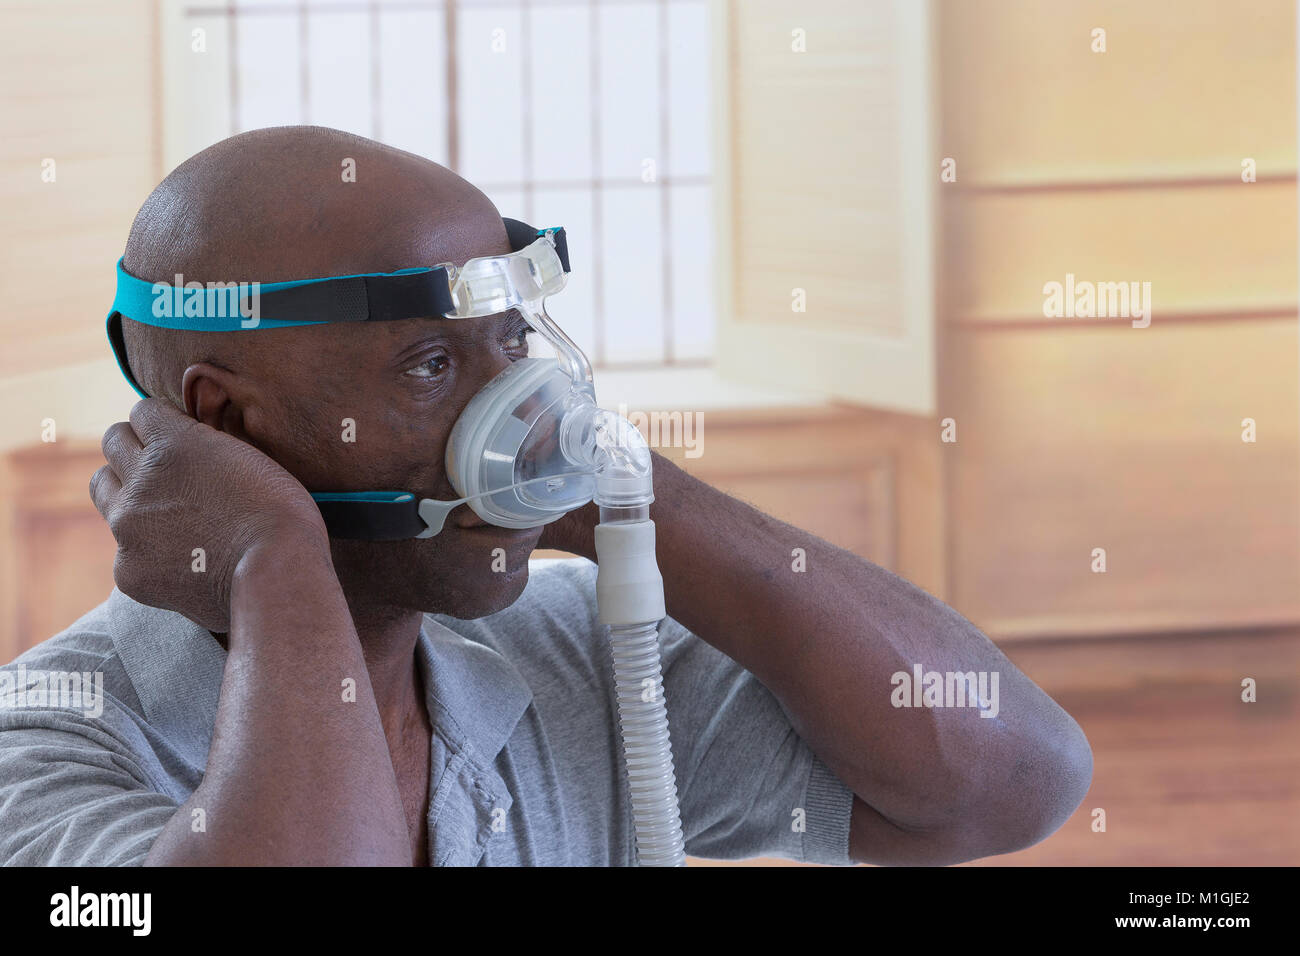 Man with a sleeping disorder tries on a Cpap for the first time,Man learns to adjust his CPAP equipment in luxery house beroom Stock Photo